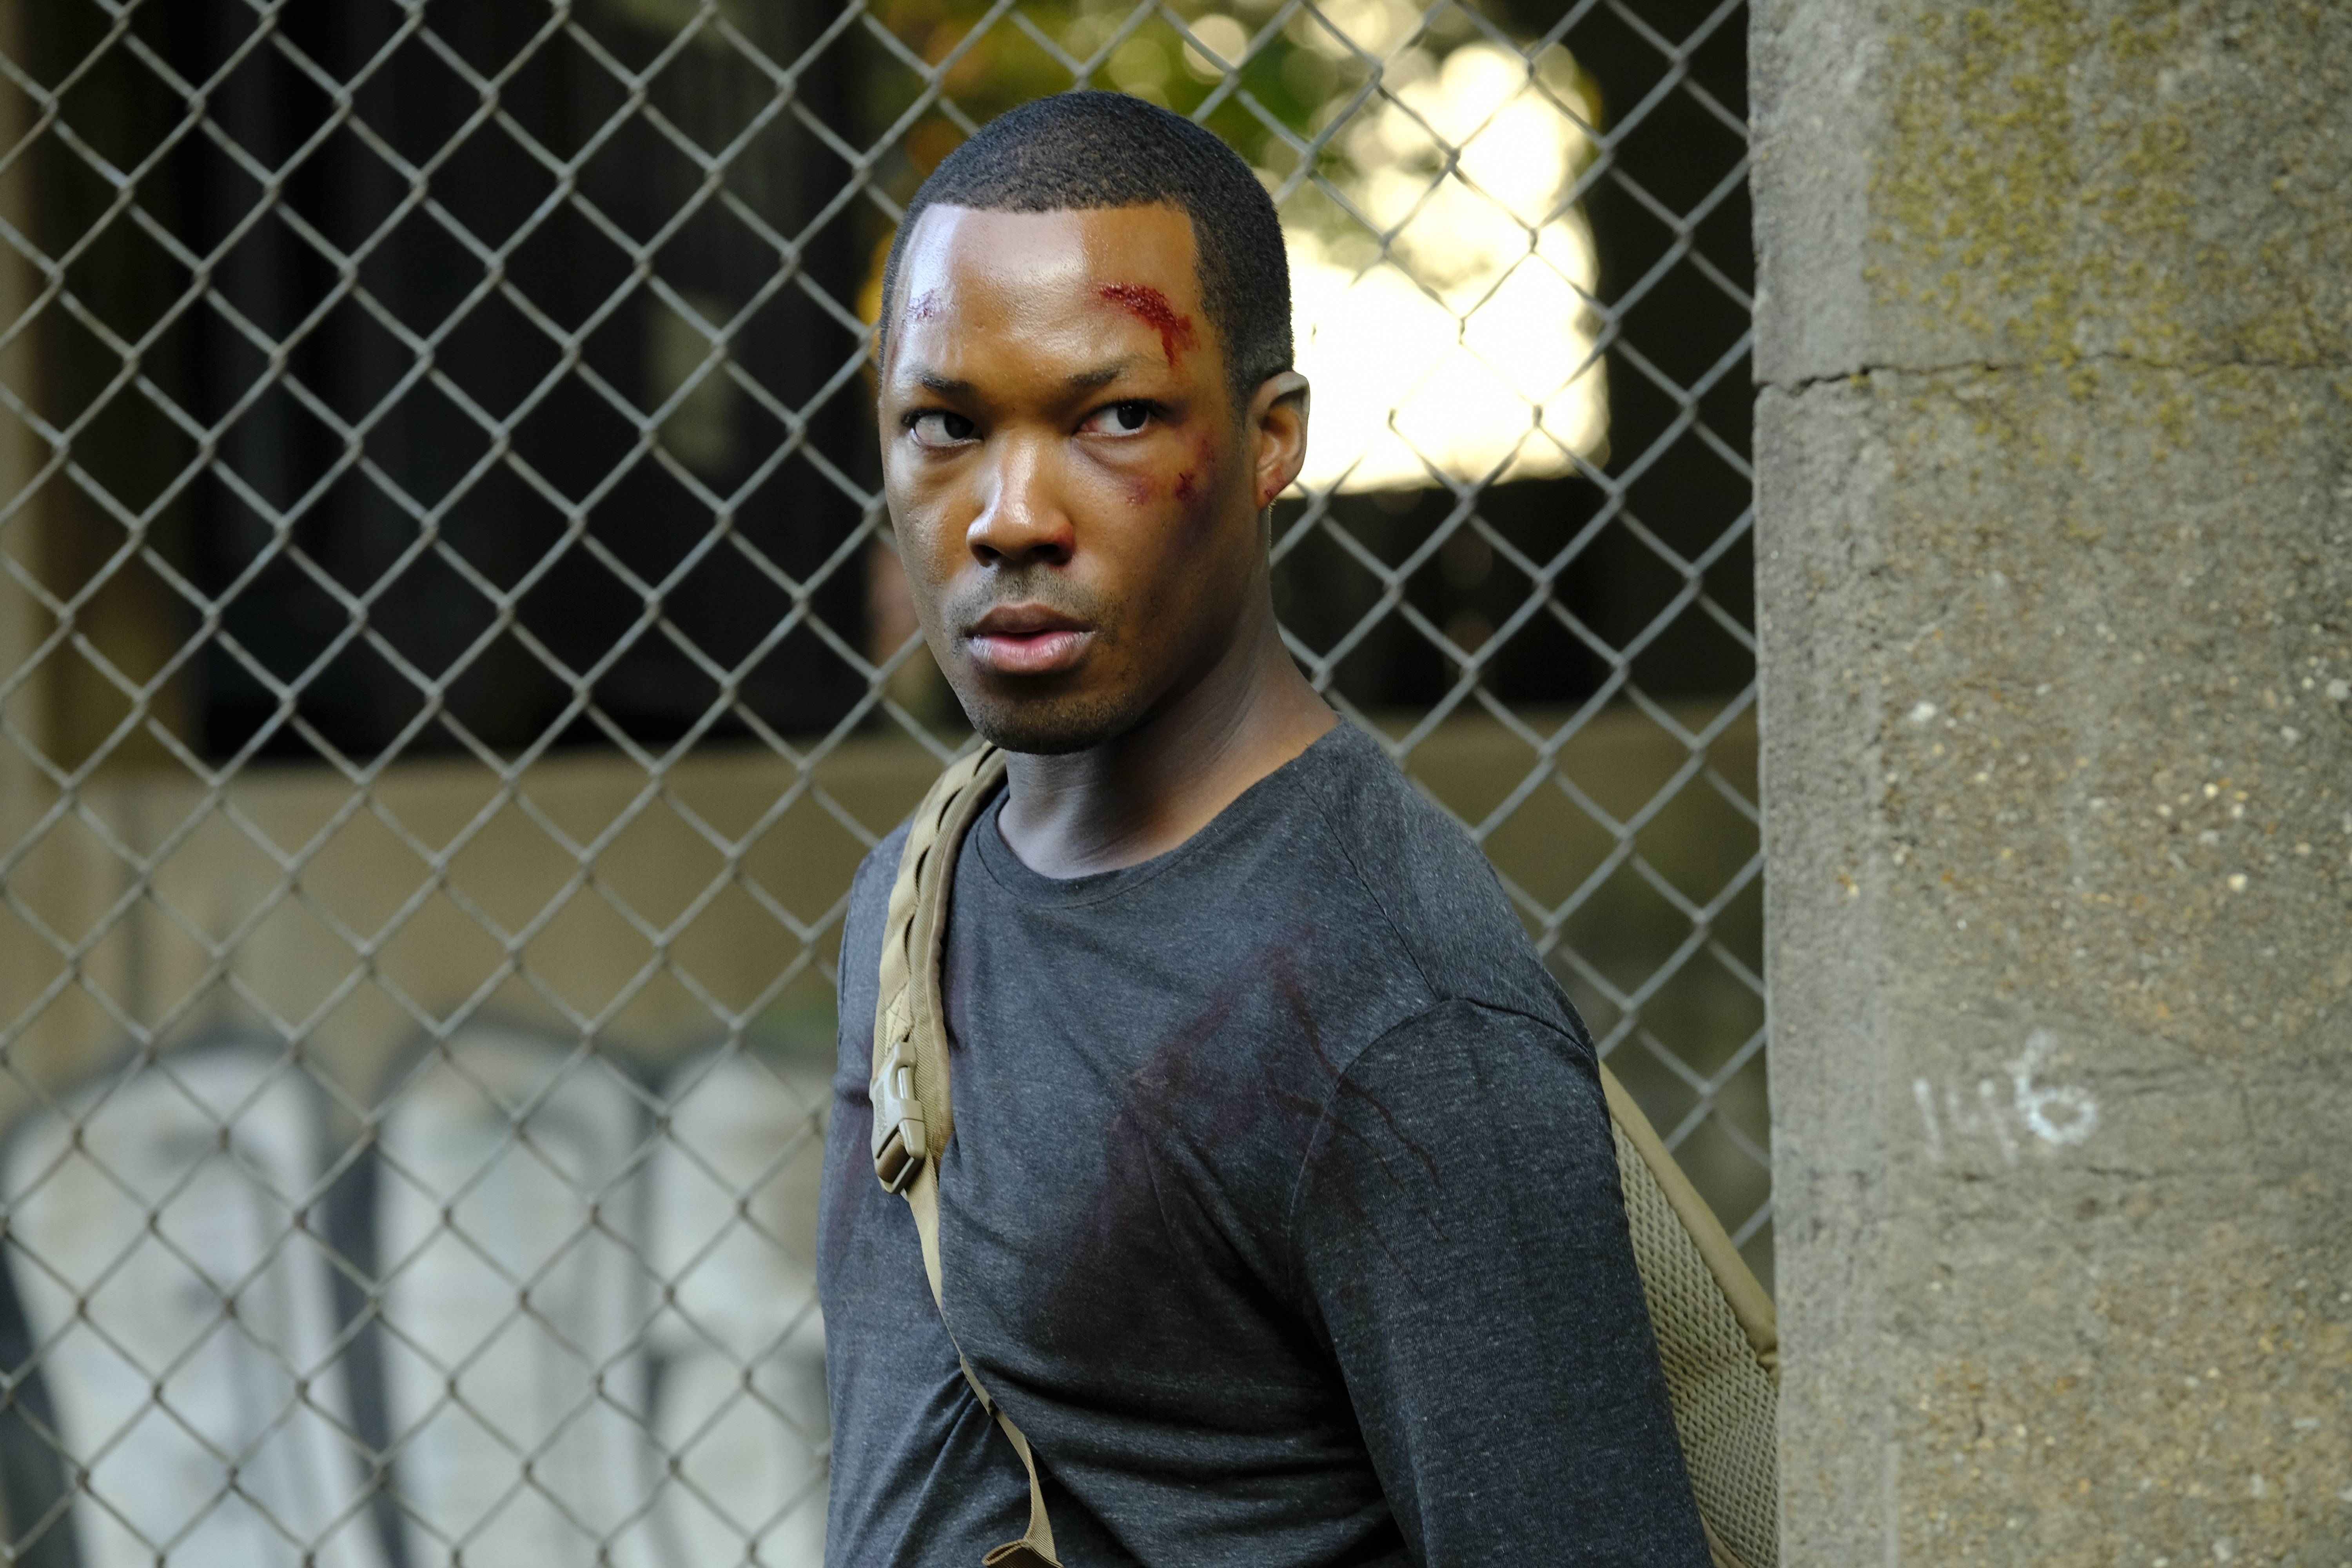 Cover image for  article: "24: Legacy" Works -- Even Without Jack Bauer 